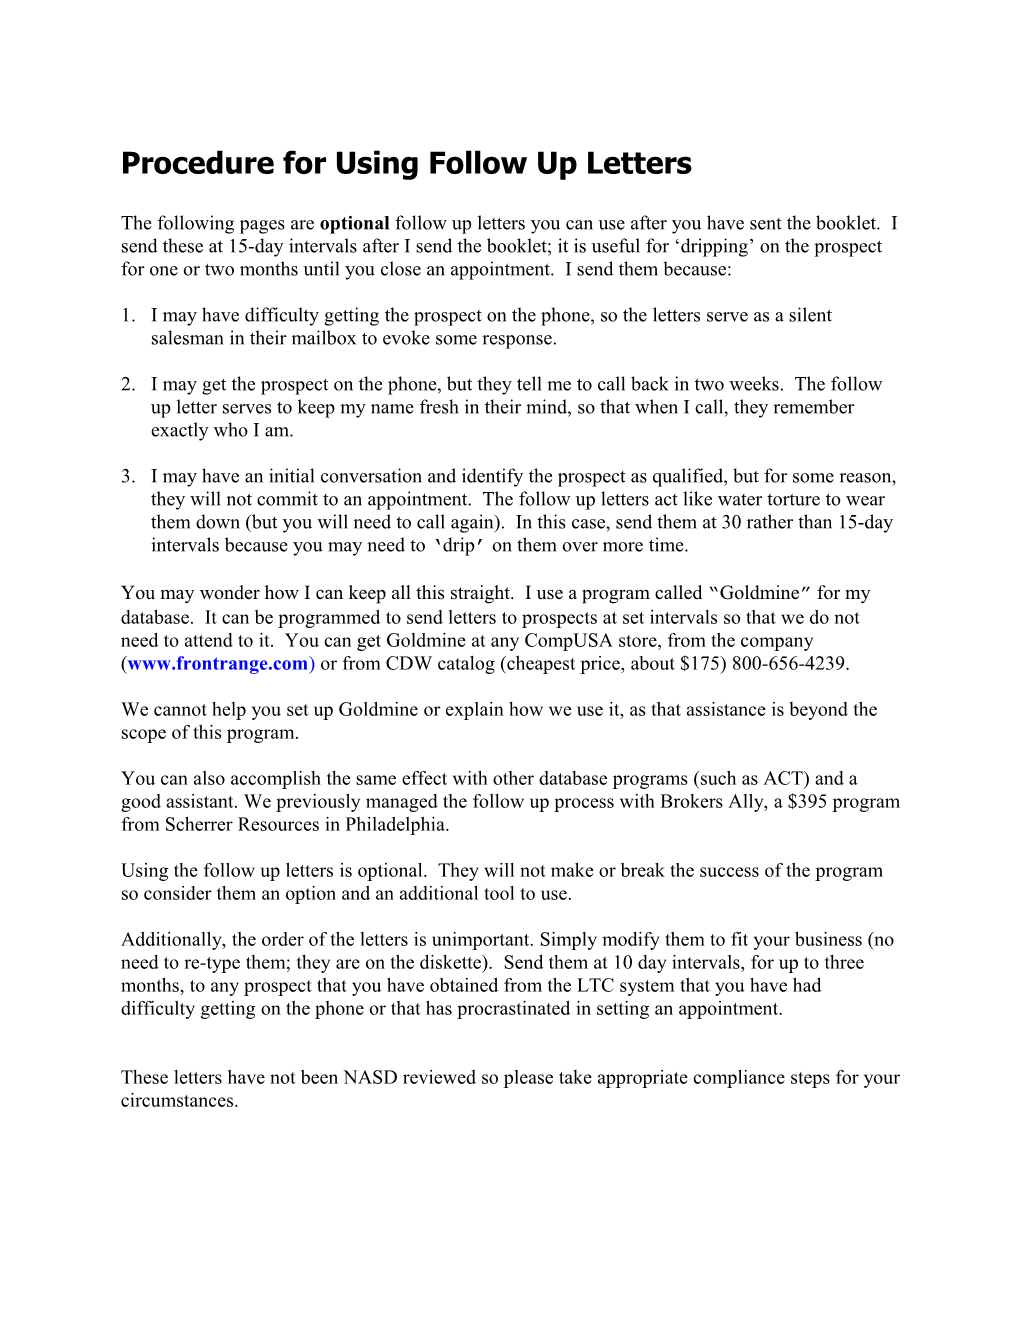 Procedure for Using Follow up Letters